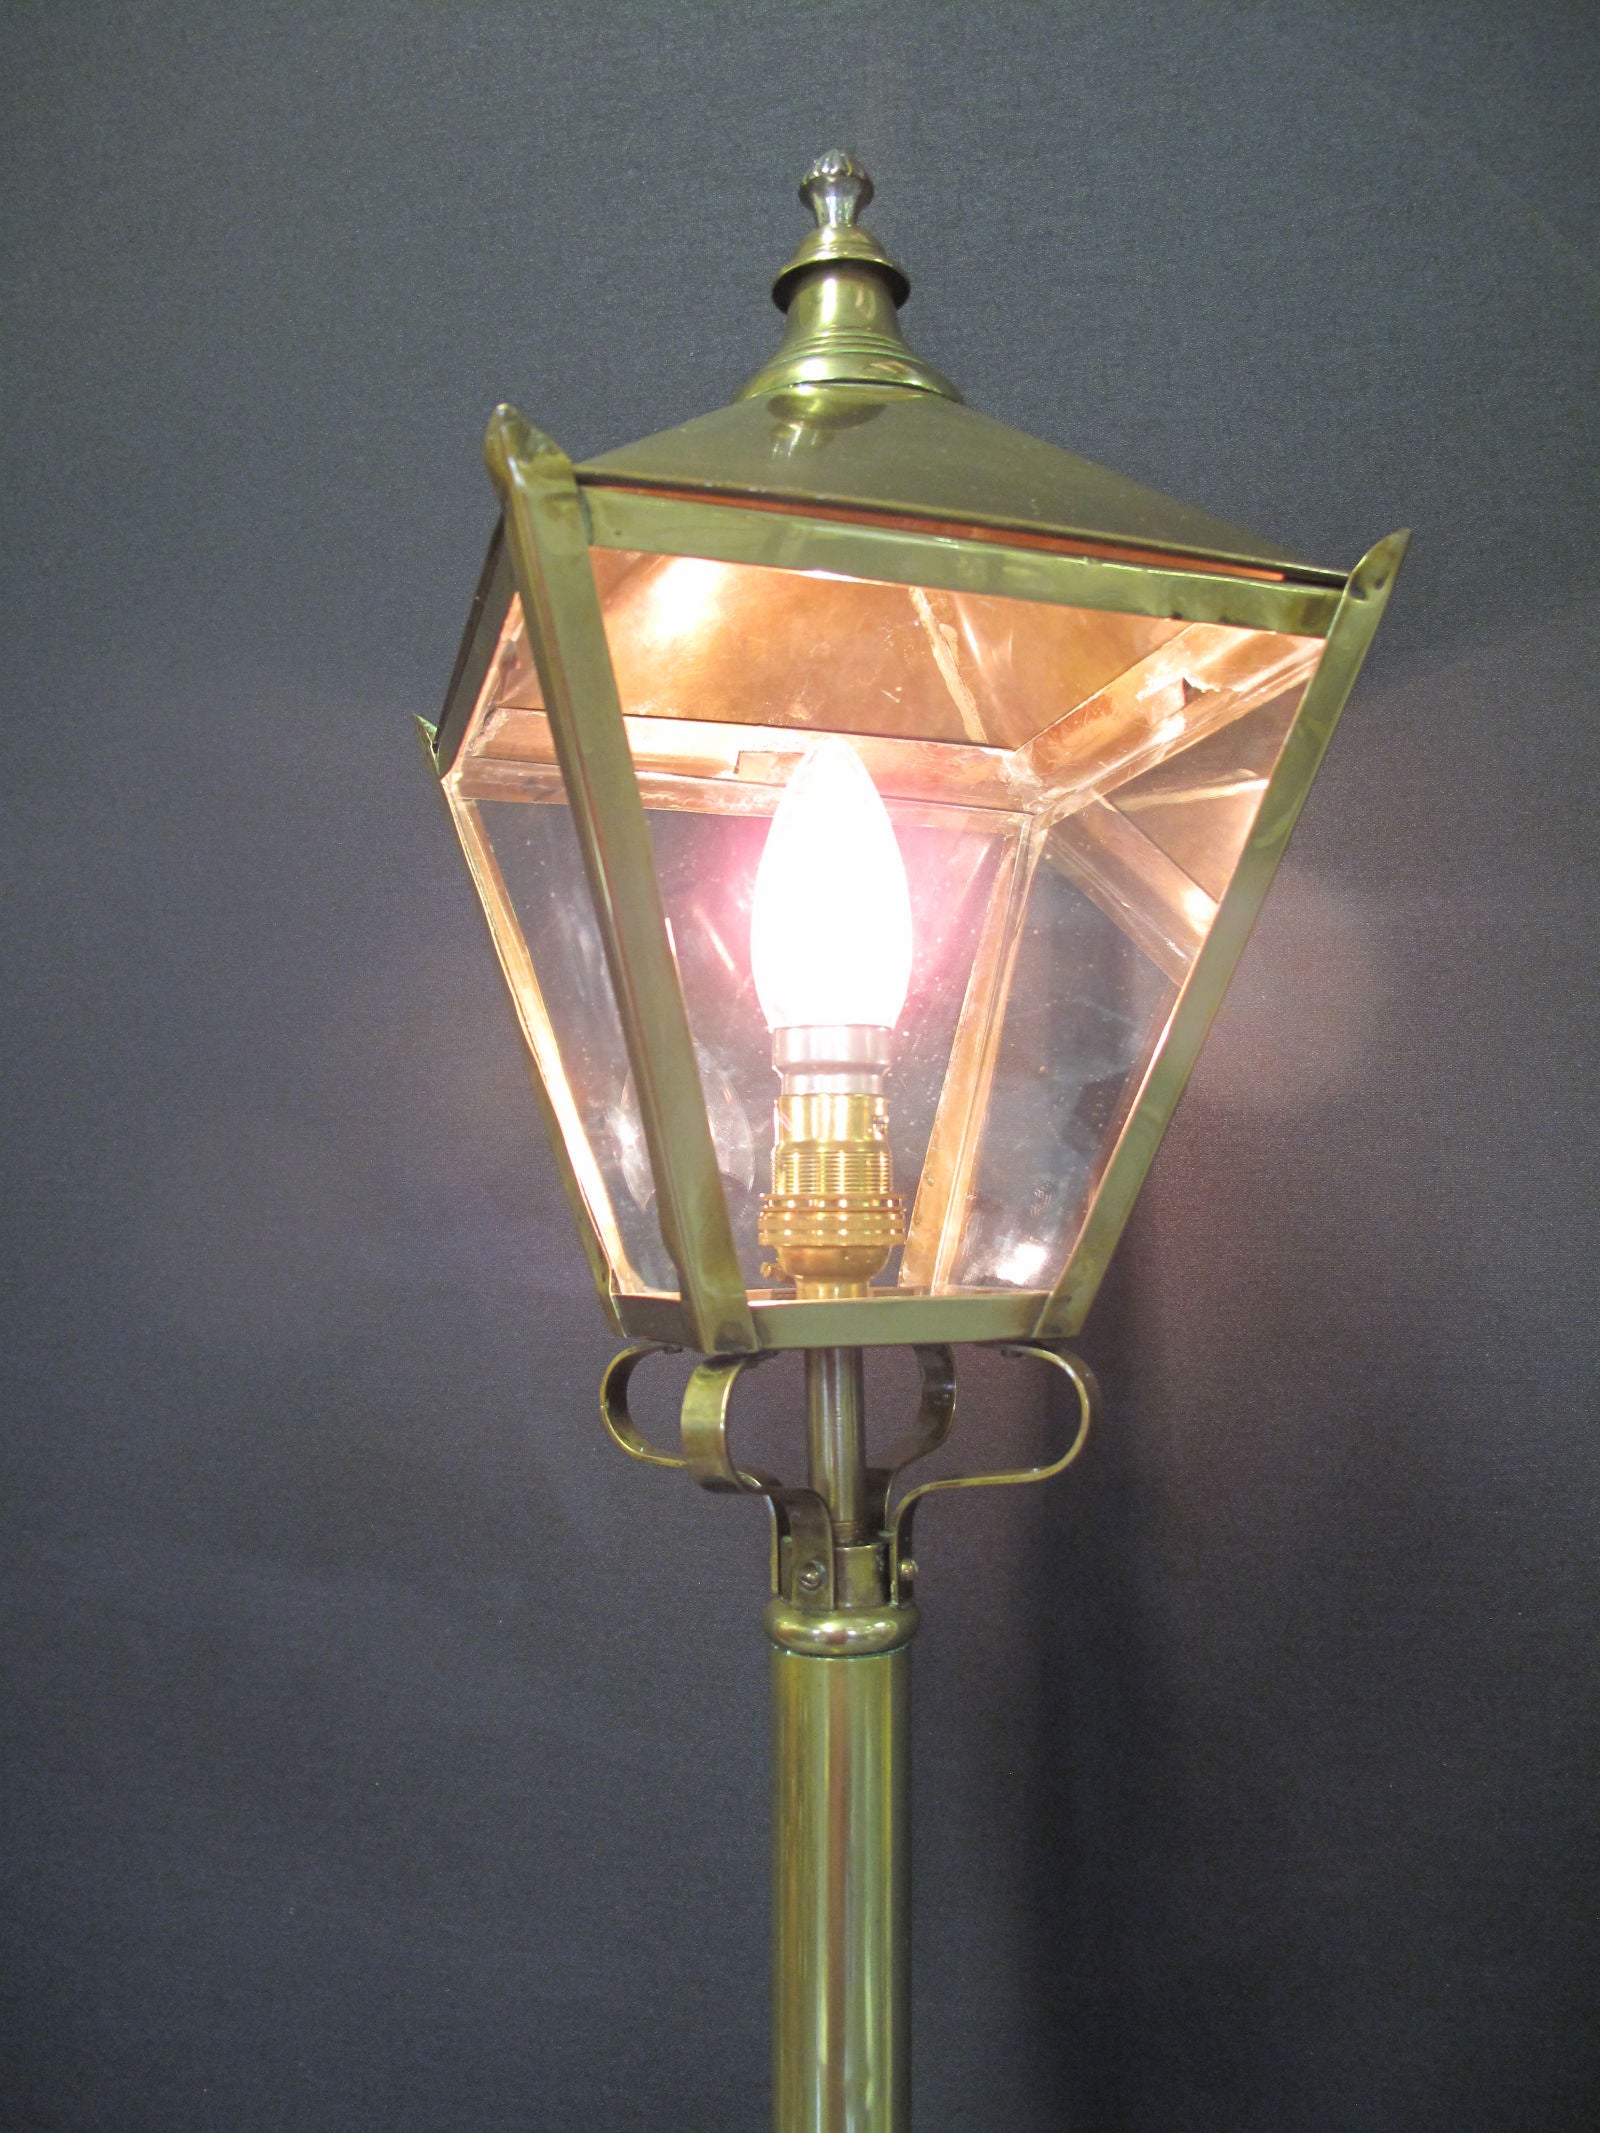 lamp lit showing panes of glass